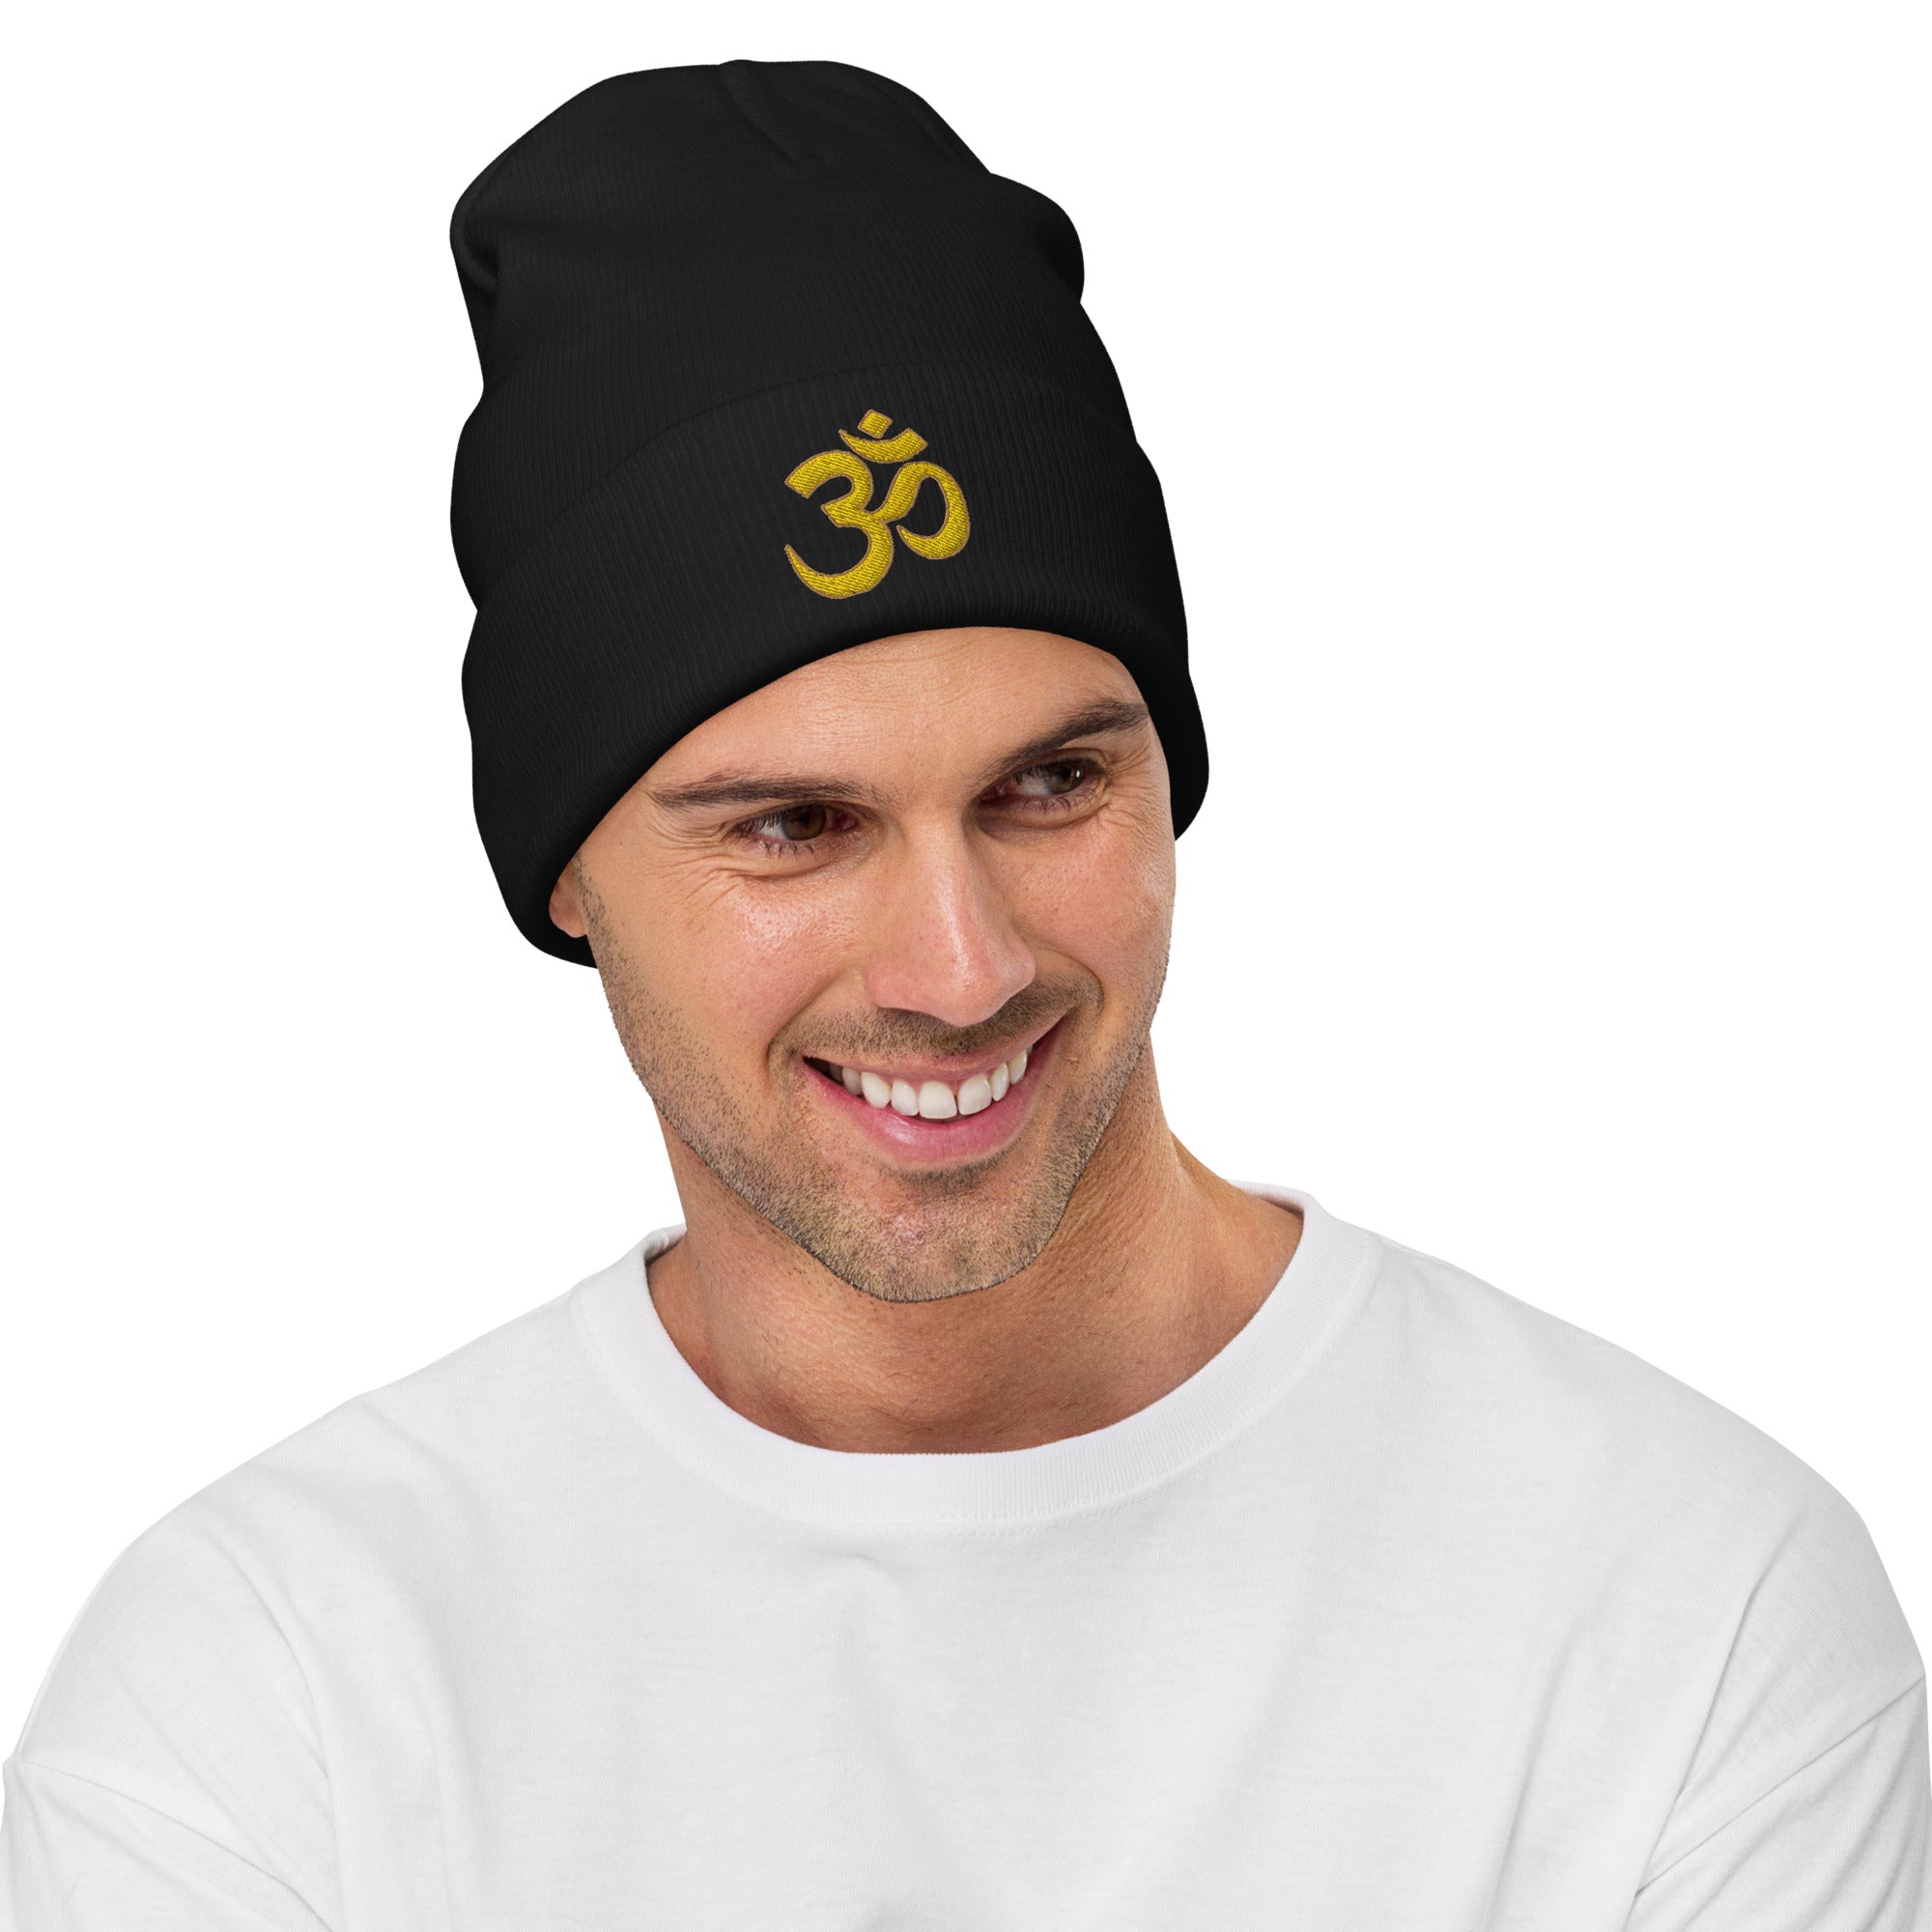 OM Sacred Spiritual Symbol Embroidered Cuff Beanie Vibration of the Universe - Edge of Life Designs